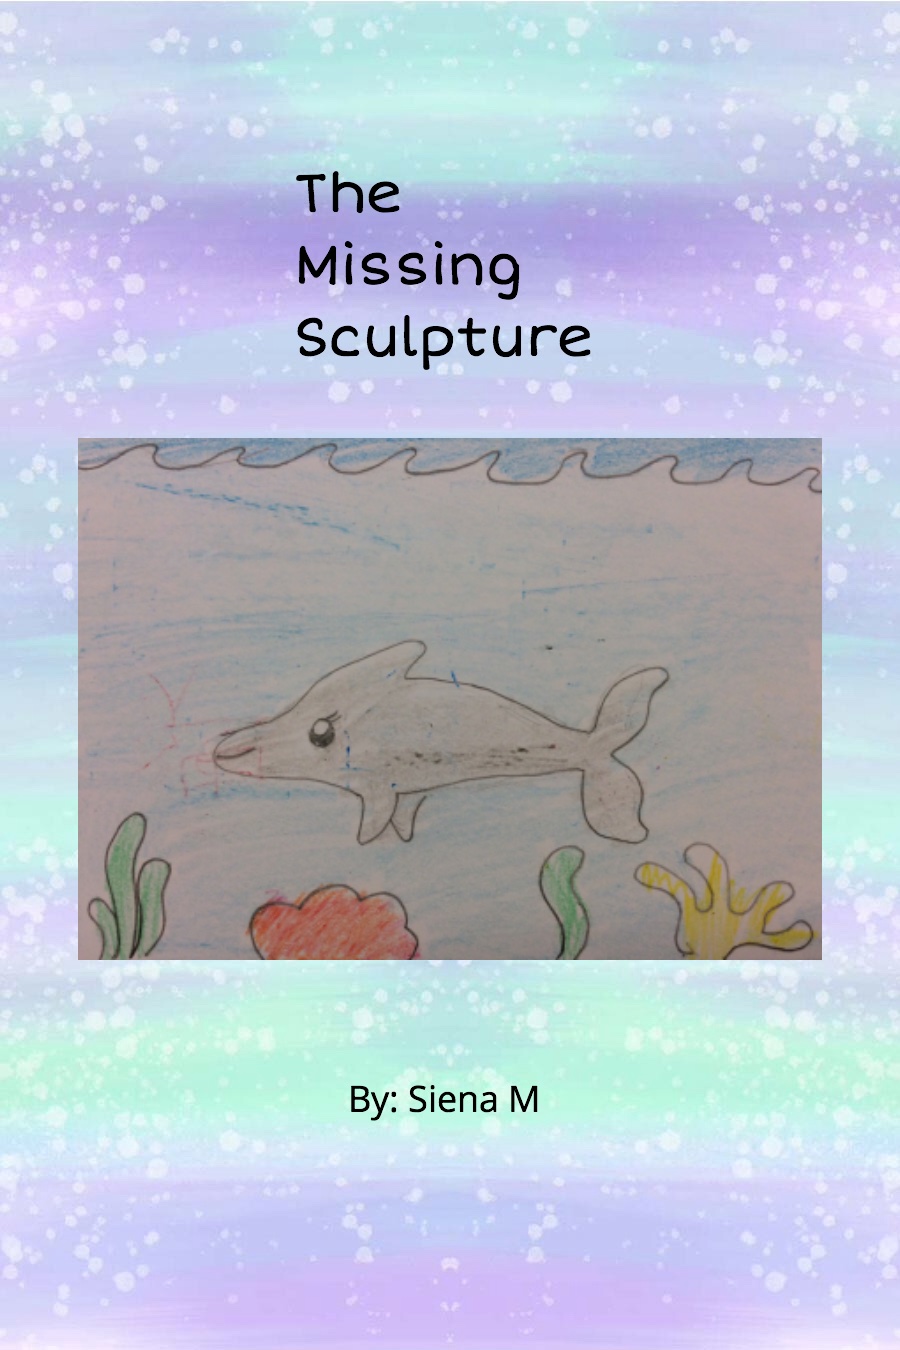 The Missing Sculpture by Siena M